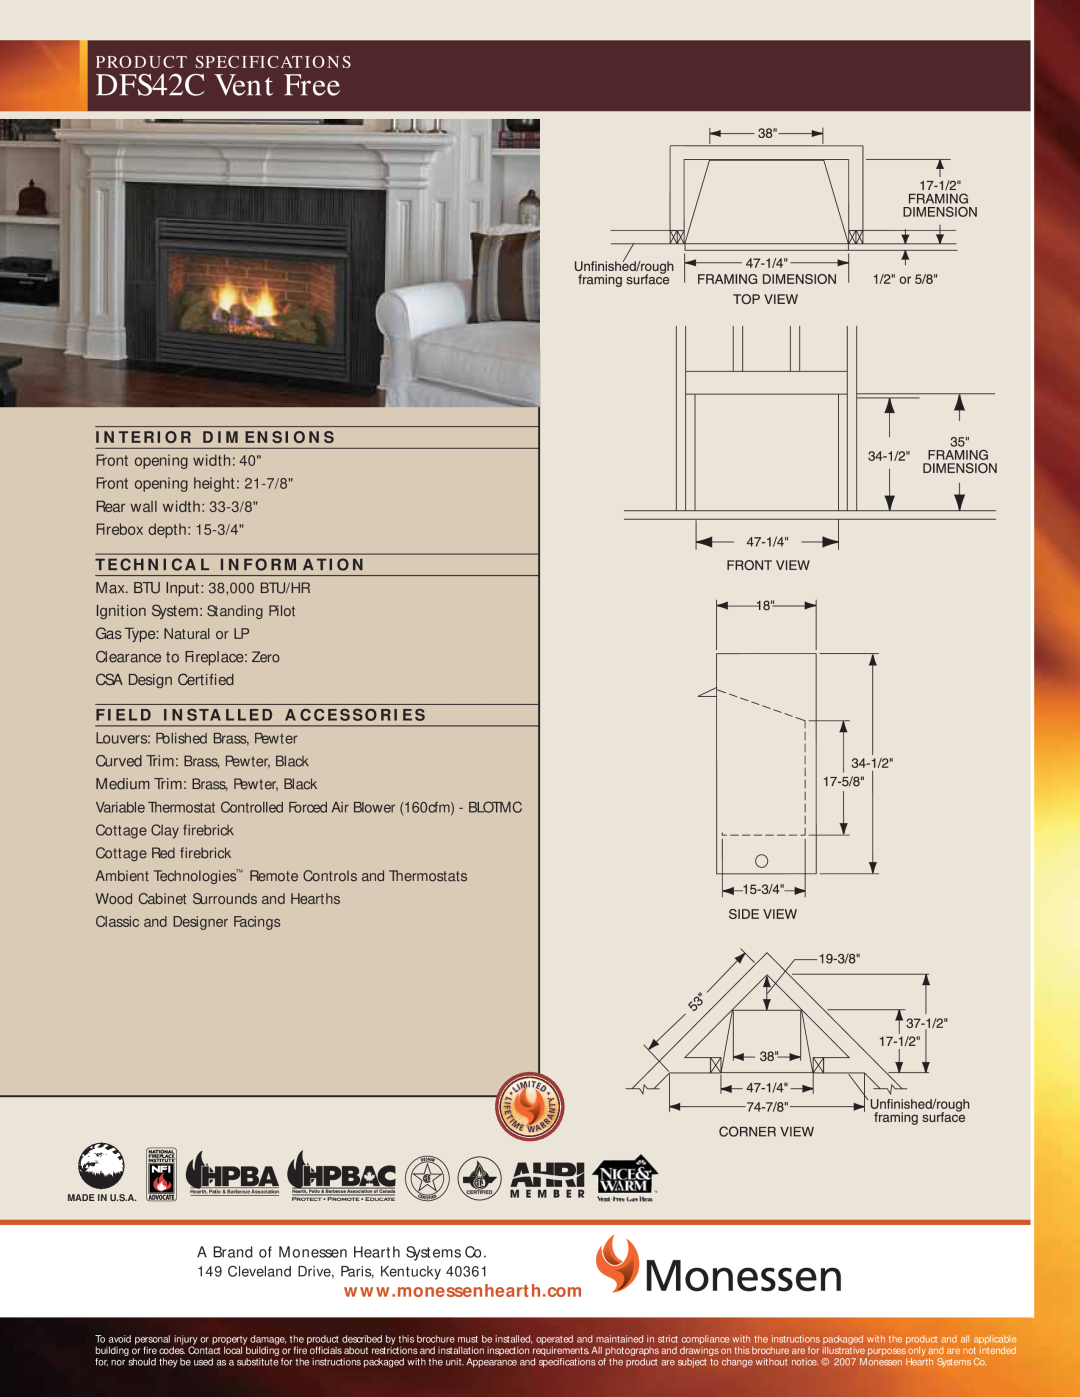 Monessen Hearth specifications DFS42C Vent Free, Product Specifications 